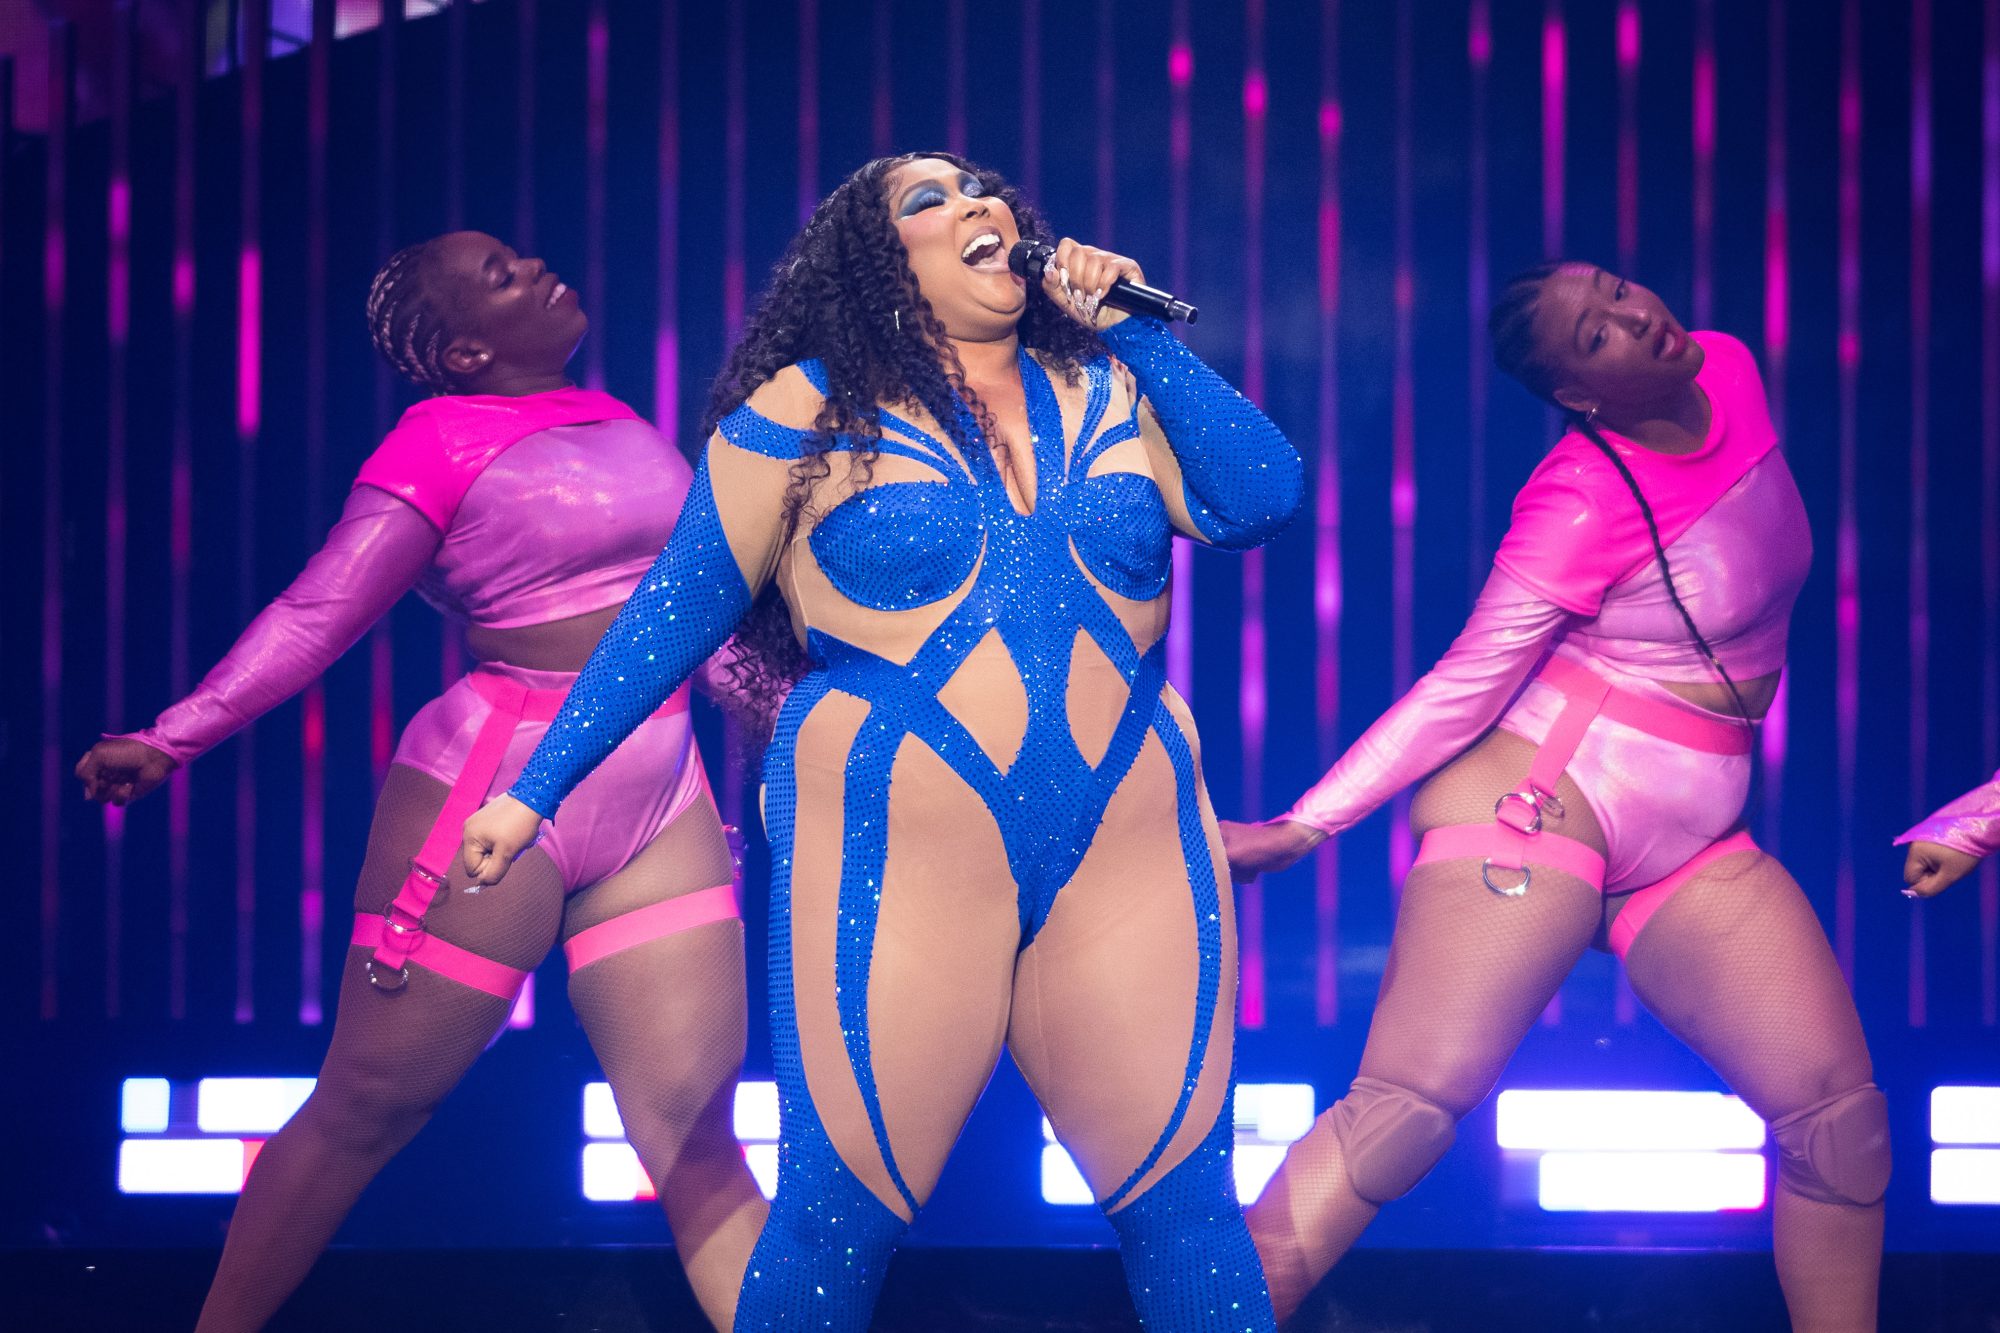 SUNRISE, FLORIDA - SEPTEMBER 23: Lizzo performs onstage during the opening night of The Special Tour at FLA Live Arena on September 23, 2022 in Sunrise, Florida. (Photo by Jason Koerner/Getty Images)